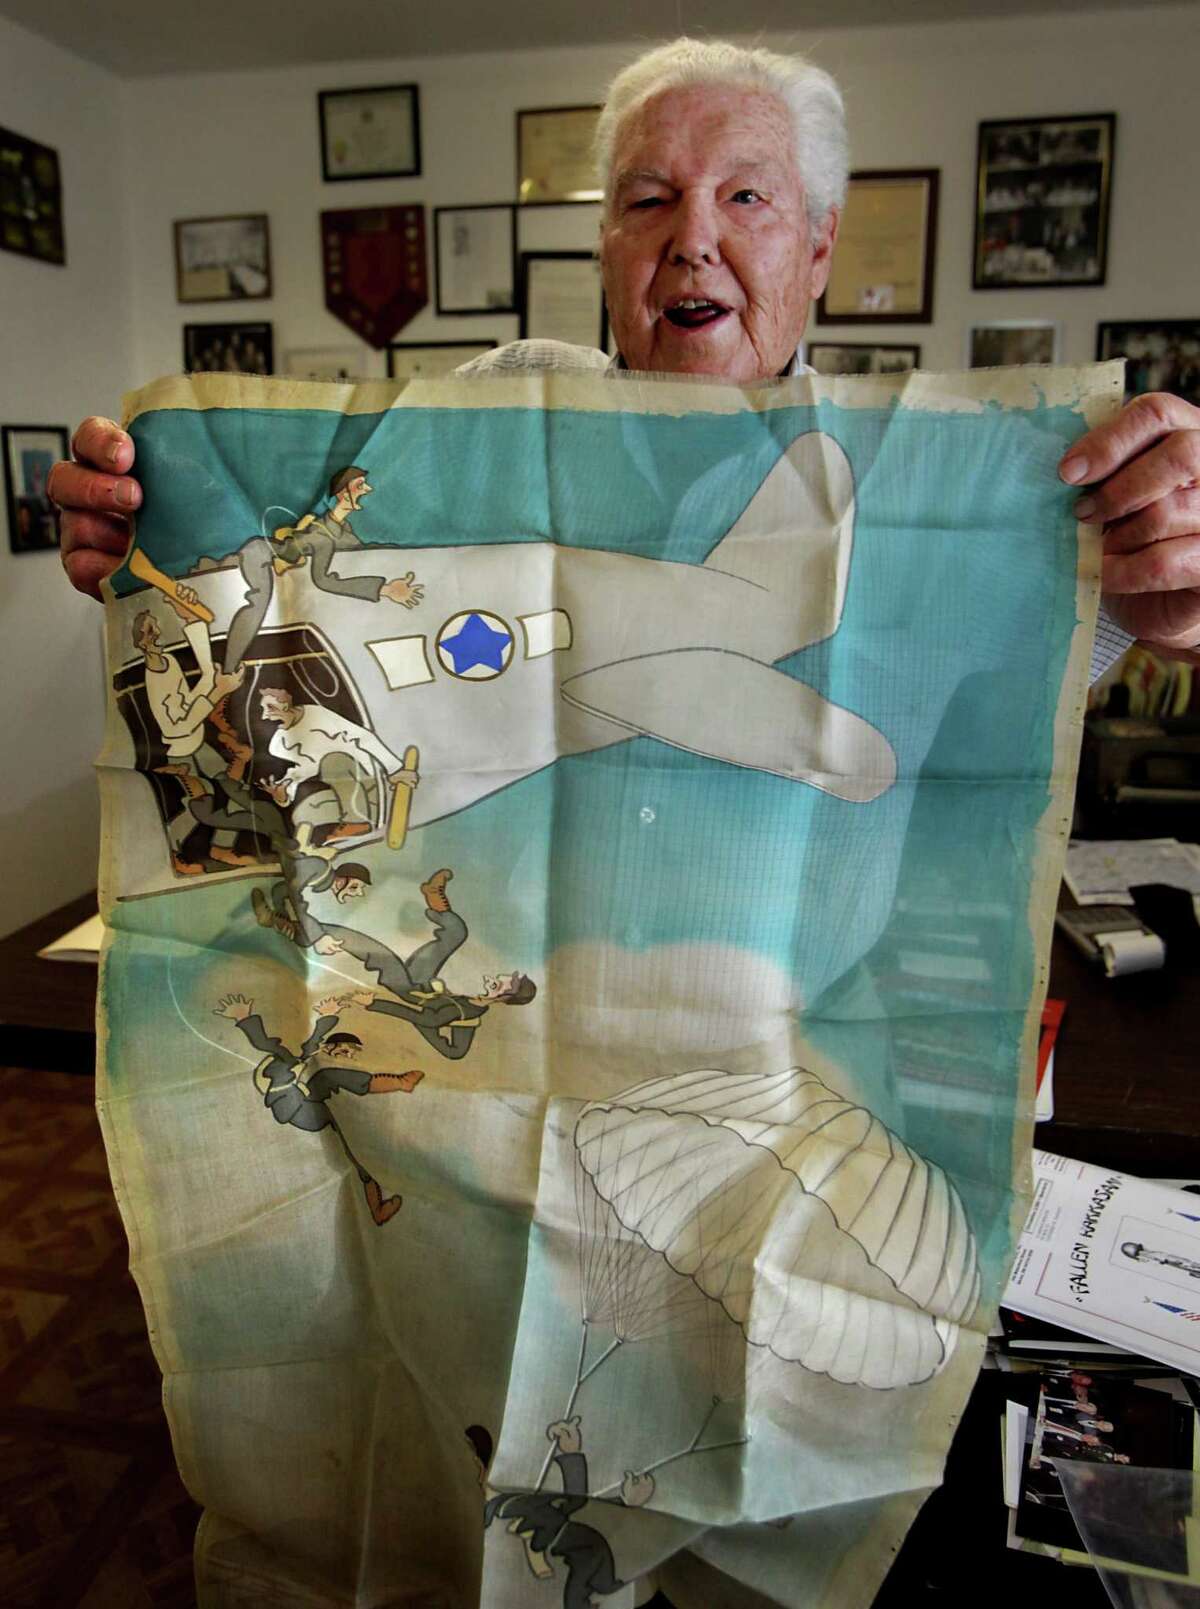 Metro adv - Retired Army Capt. Clarence Sprouse, holding up a Japanese military propaganda poster printed on silk, recalls his days fighting in WWII, Korea, Vietnam, and as trainer for the Cuban Bay of Pigs. The poster insinuates the U.S. forced soldiers to serve in the army. Sprouse has been called "The Perfect Soldier" by some of his superiors. Friday, Oct. 14, 2011. Photo Bob Owen/rowen@express-news.net